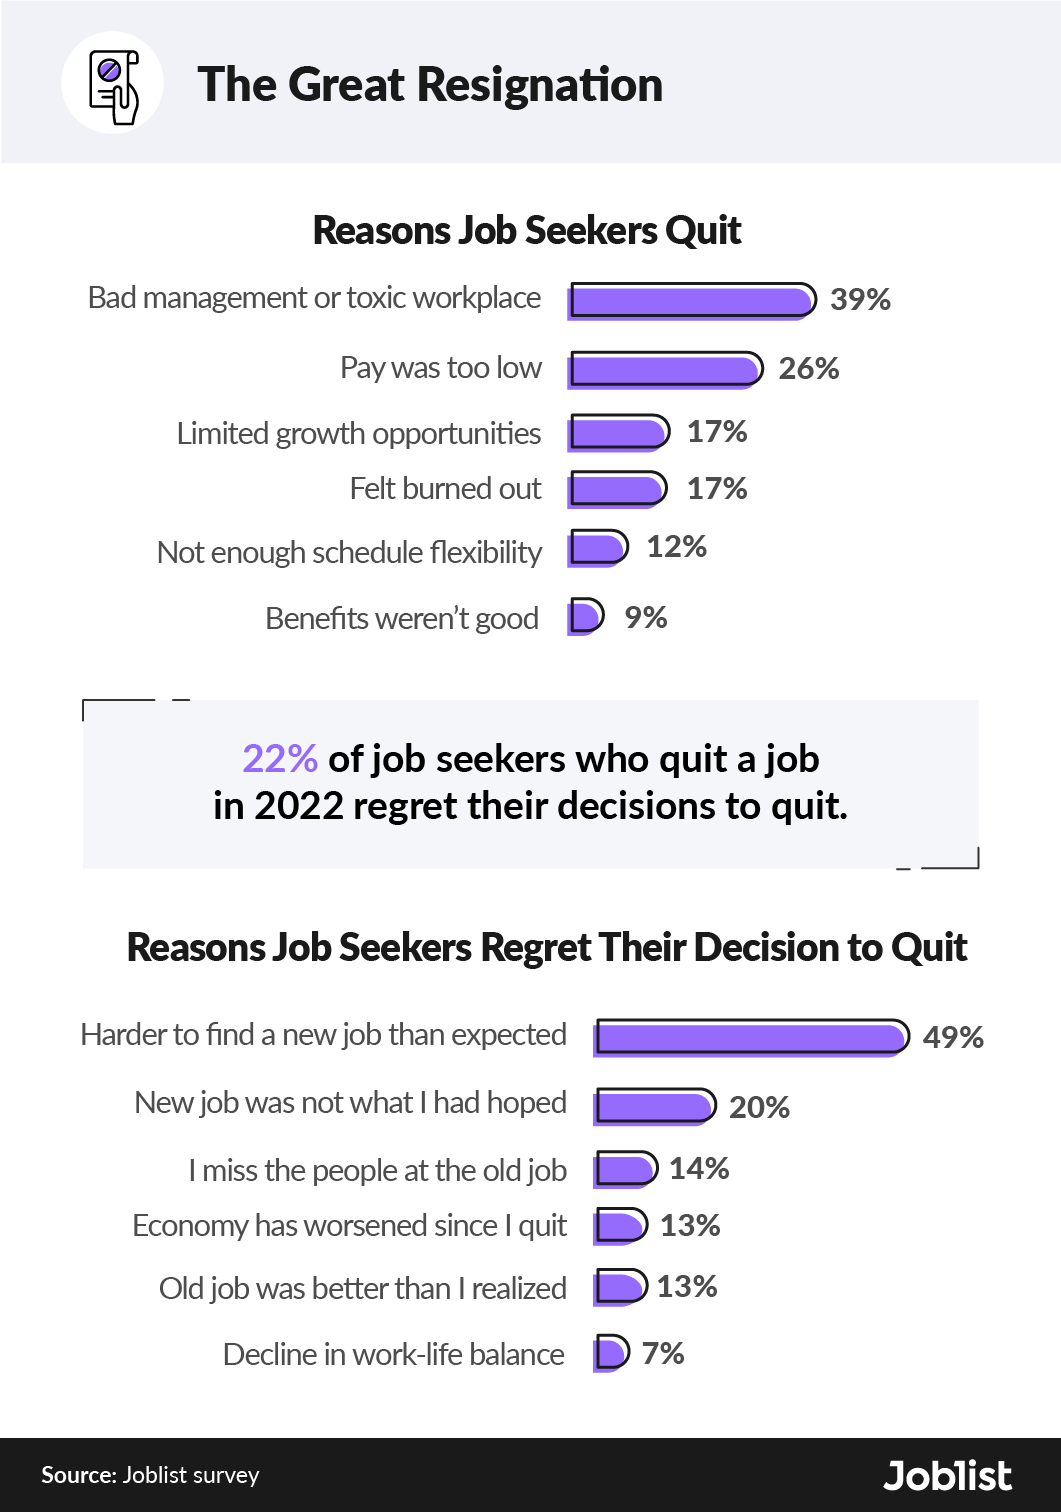 Infographic explaining the reasons why job seekers quit and the reasons why they regret quitting.